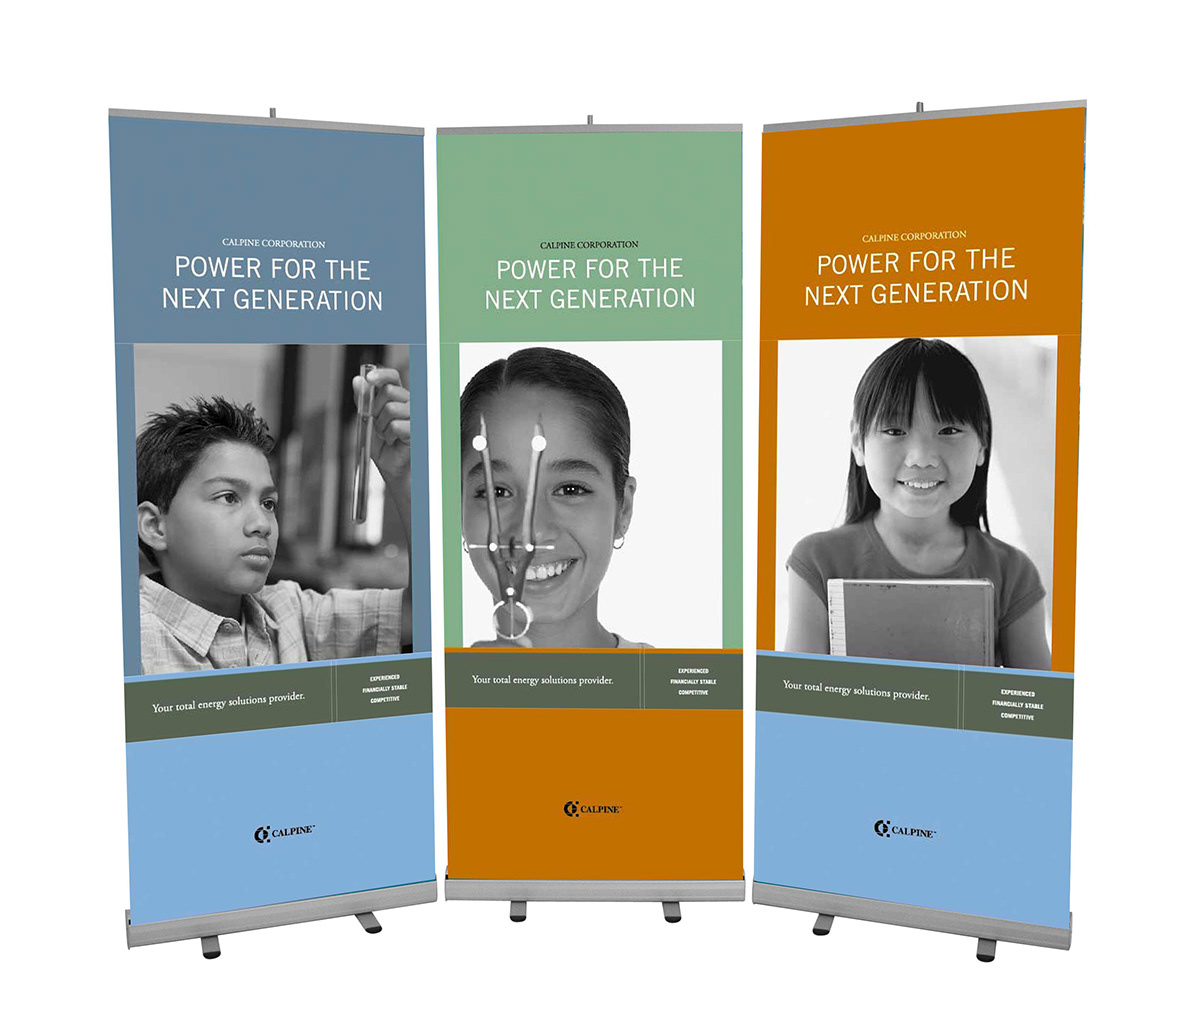 banner stands trade show graphics trade show displays Exhibit graphics Marketing Supplies Presentation Graphics retractable banner stands retractable banners Large Format Graphics branding tools advertising graphics